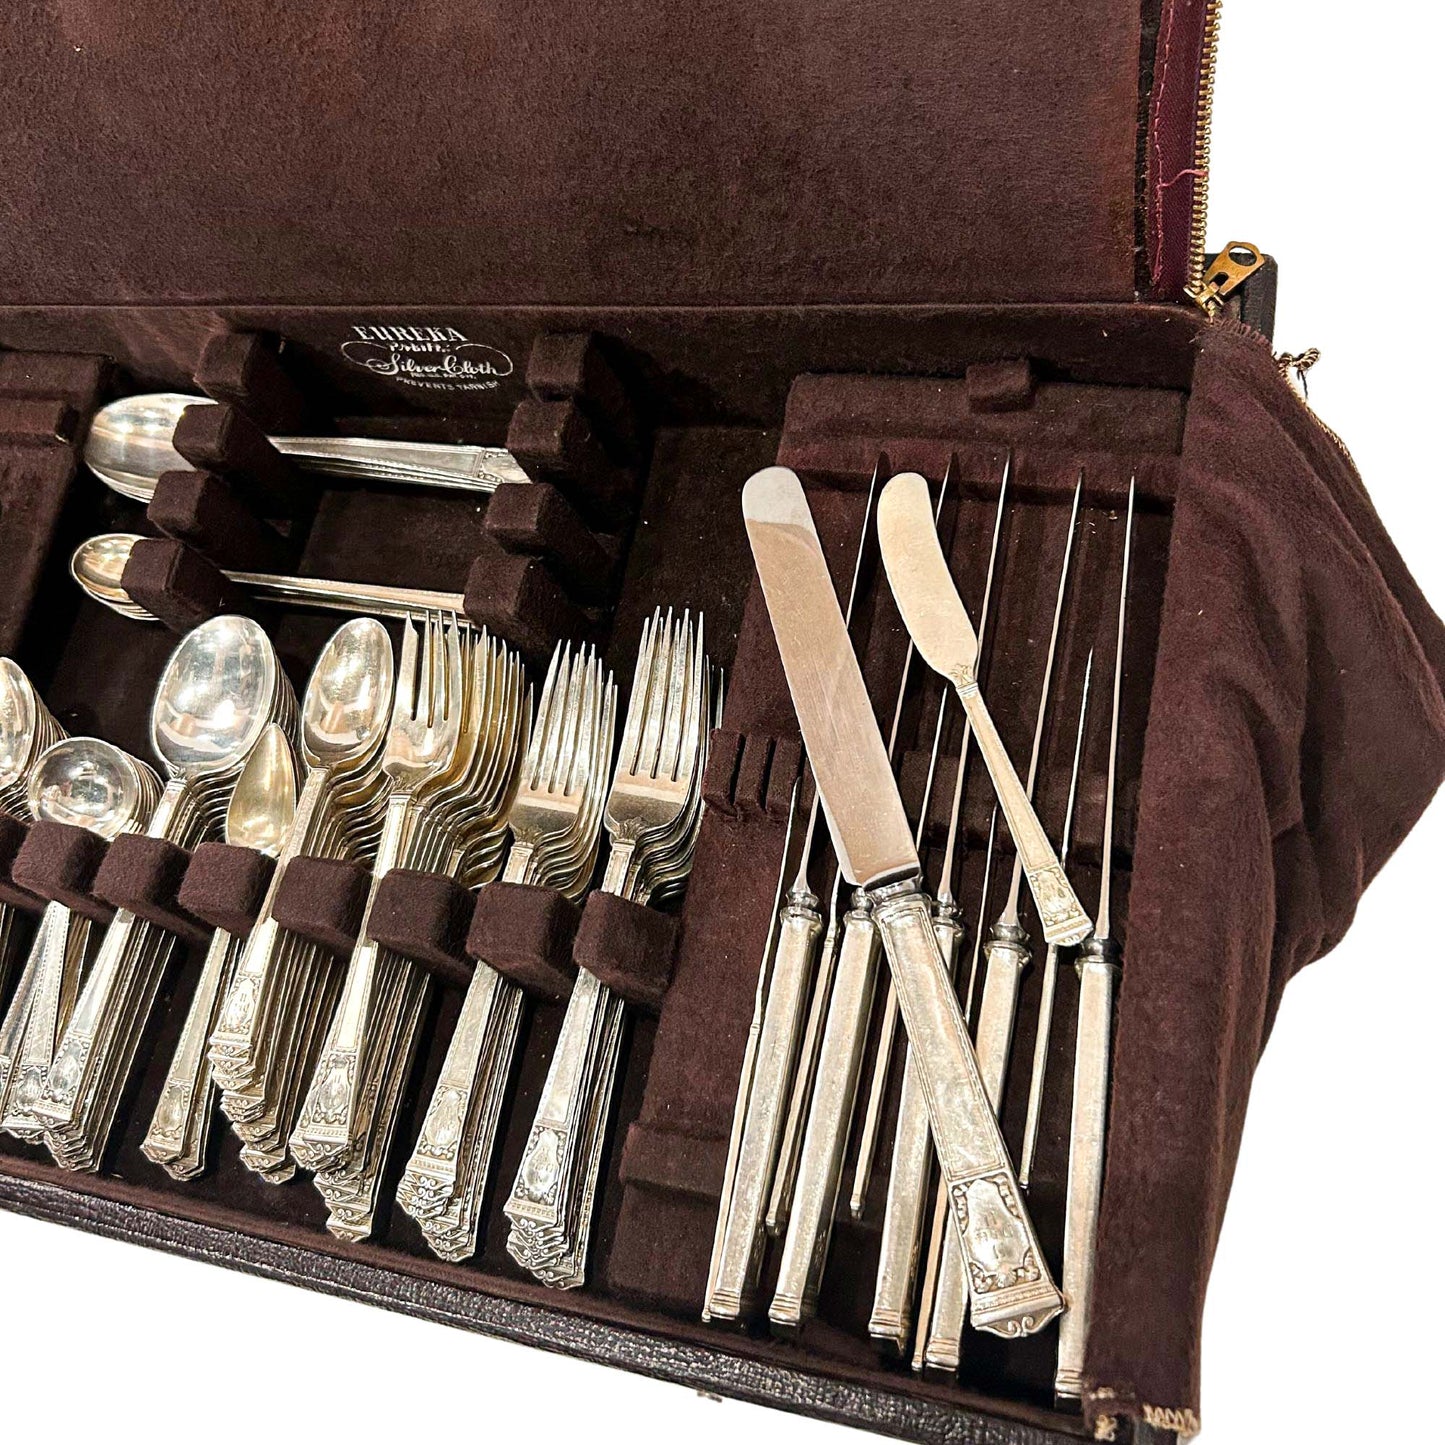 Tiffany & Co. Silver Utensils Detailed View